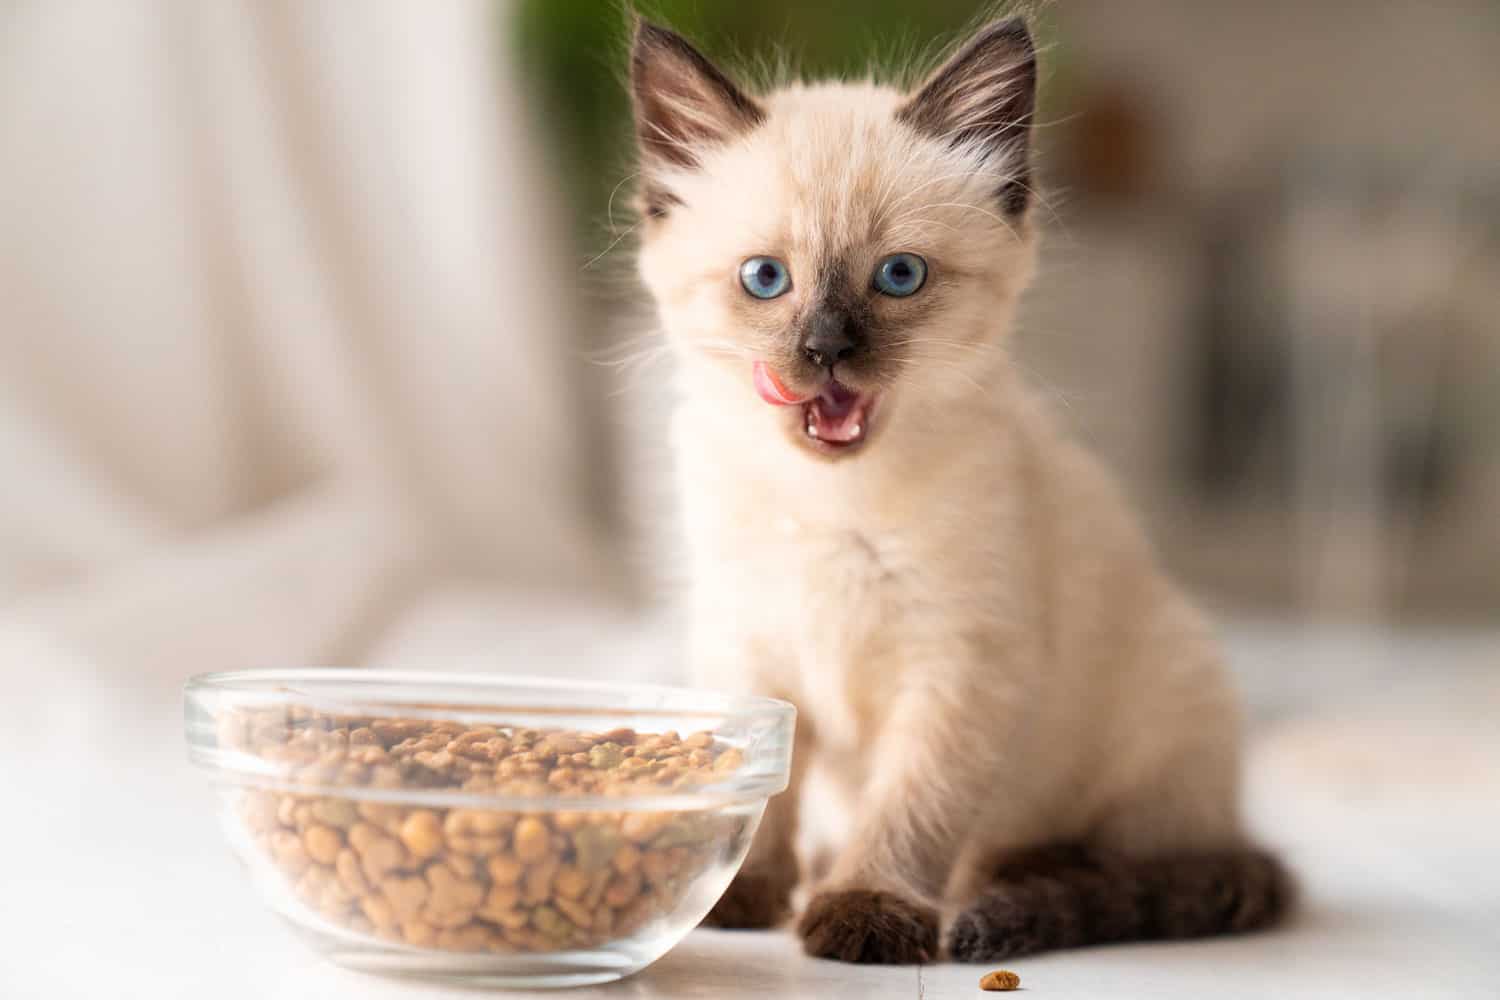 Funny little fluffy kitten eats dry food from a bowl. Kitten licks, delicious meal. Siamese or Thai cat breed. High quality photo
